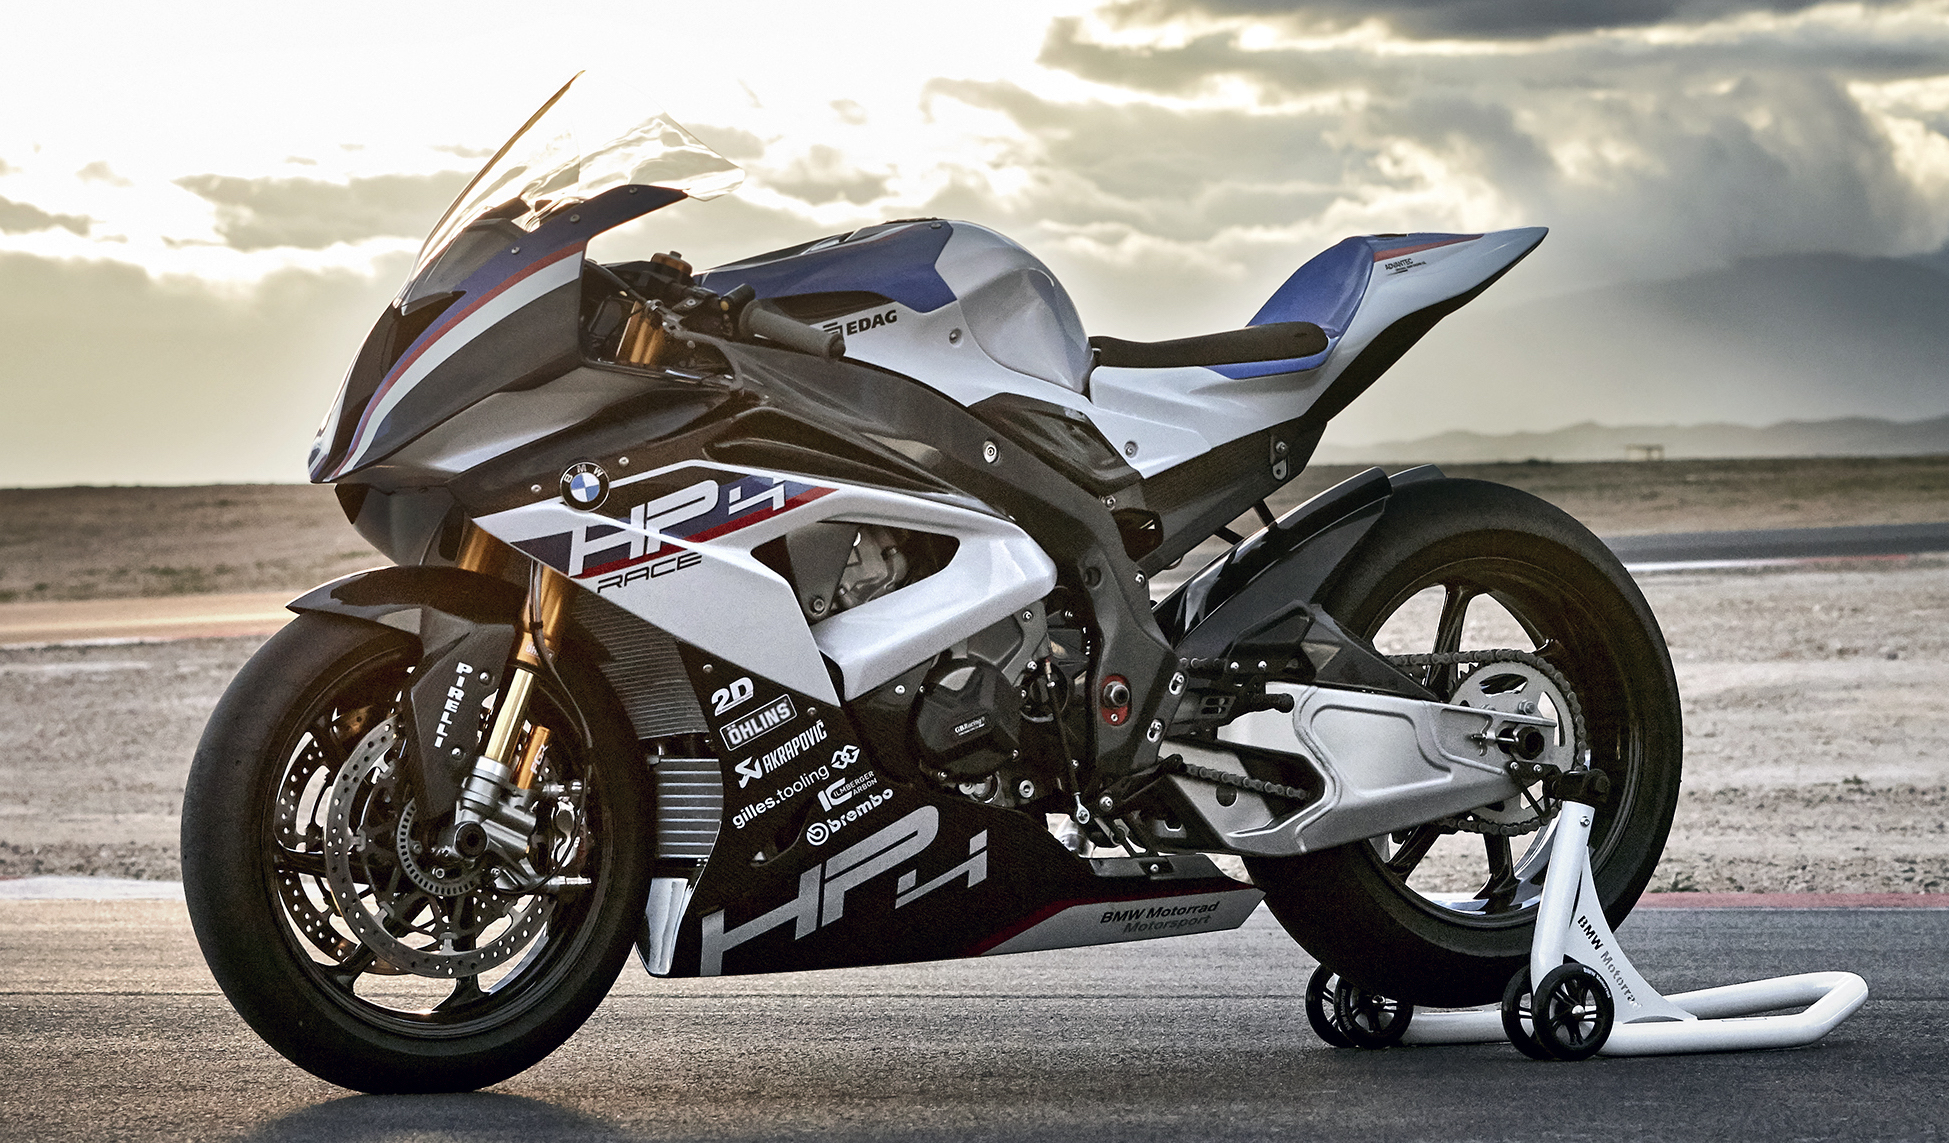 2017 BMW Motorrad HP4 Race racing motorcycle released - limited edition ...